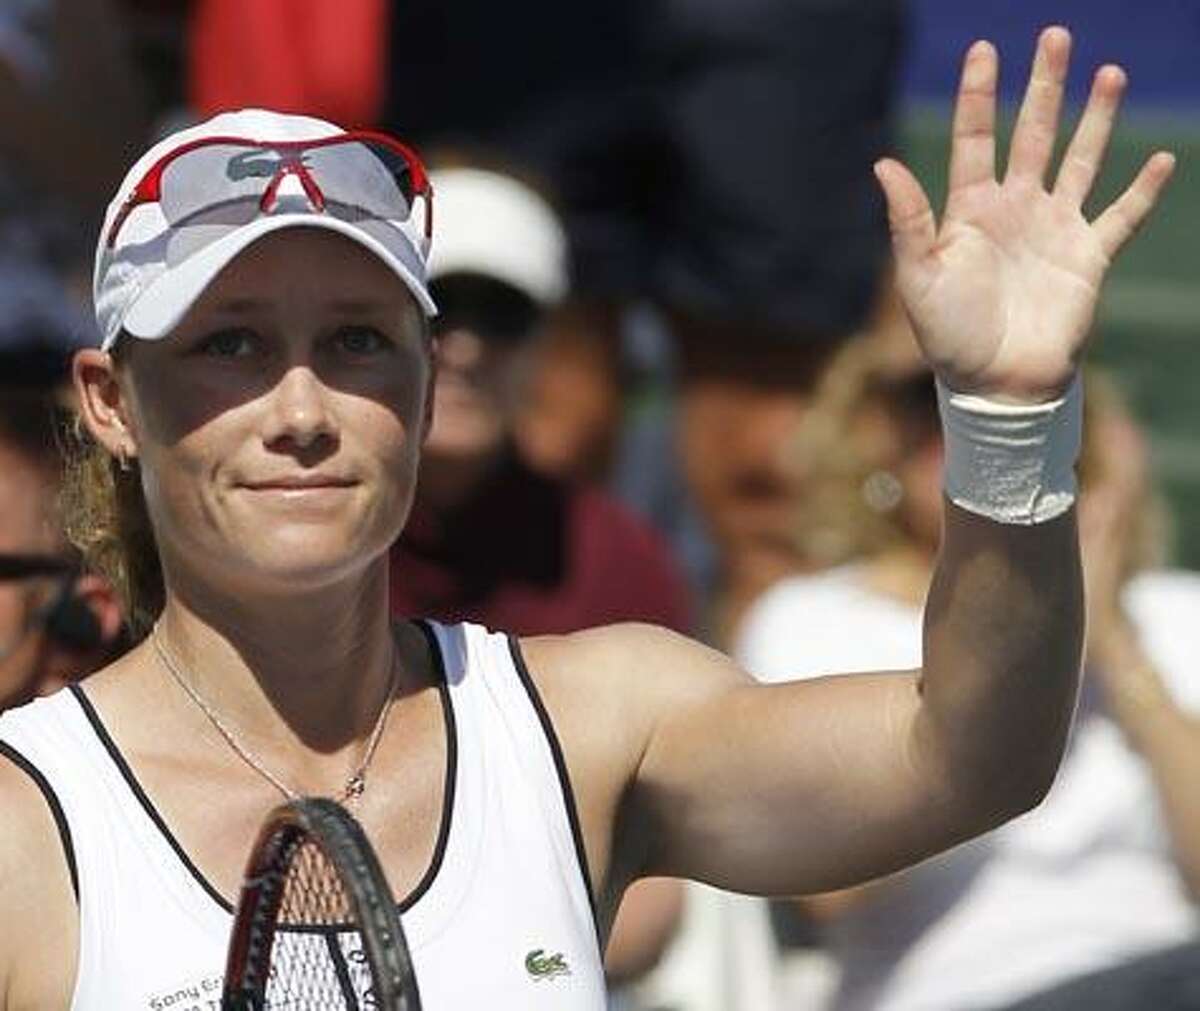 Samantha Stosur, of Australia, waves after her win against Melanie Oudin during the Mercury Insurance Open tennis tournament in Carlsbad, Calif., Wednesday, Aug. 4, 2010. (AP Photo/Chris Carlson)